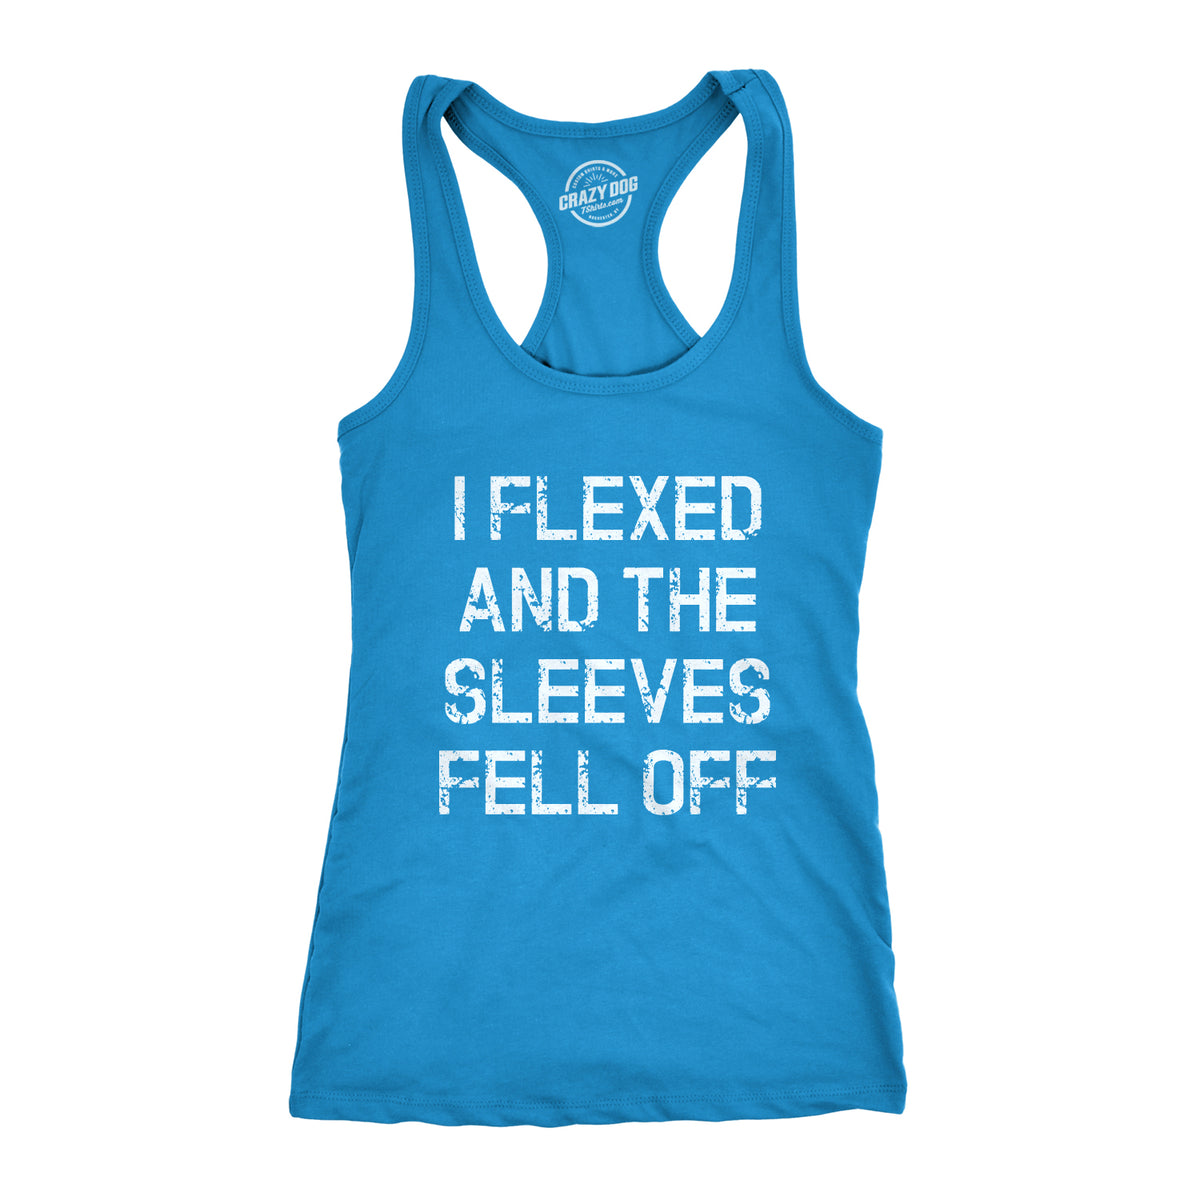 Funny Turquoise I Flexed And The Sleeves Fell Off Womens Tank Top Nerdy Fitness Tee